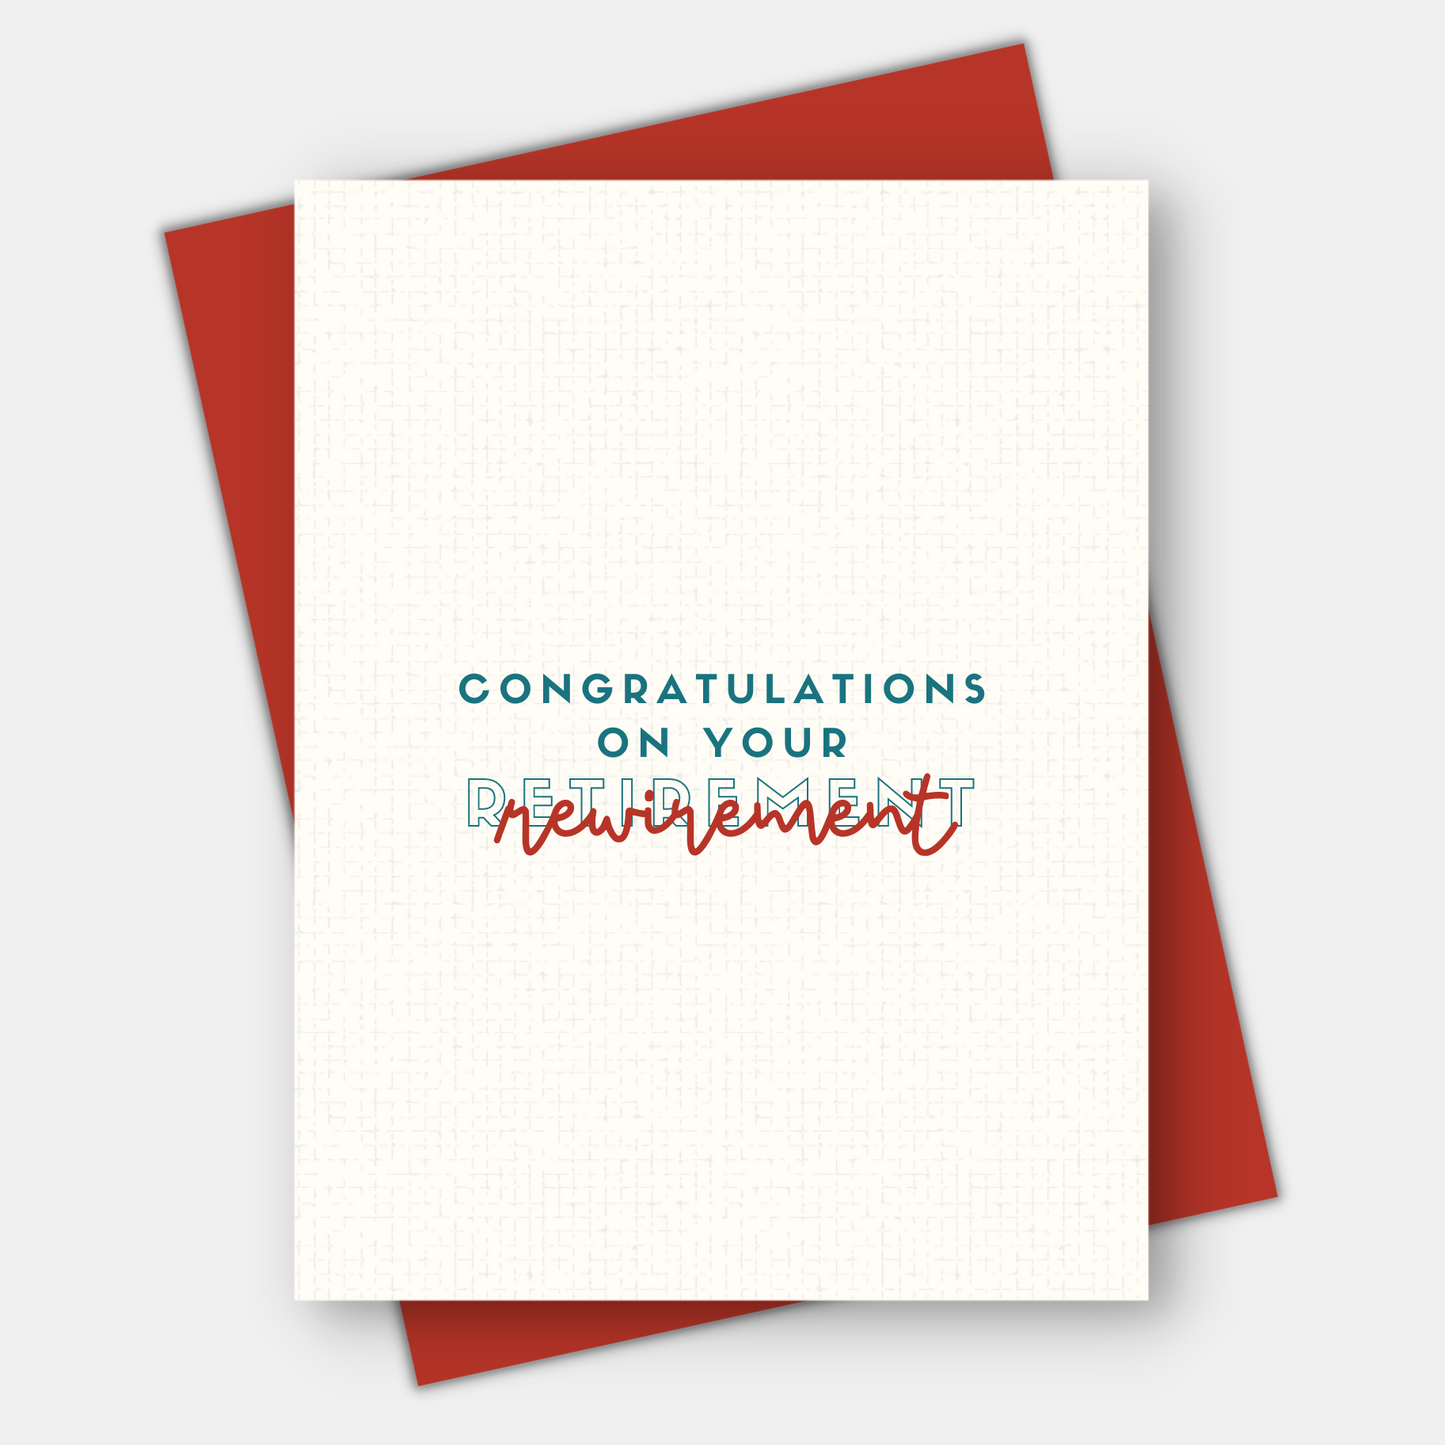 Congratulations on Your ReWirement, Retirement Card